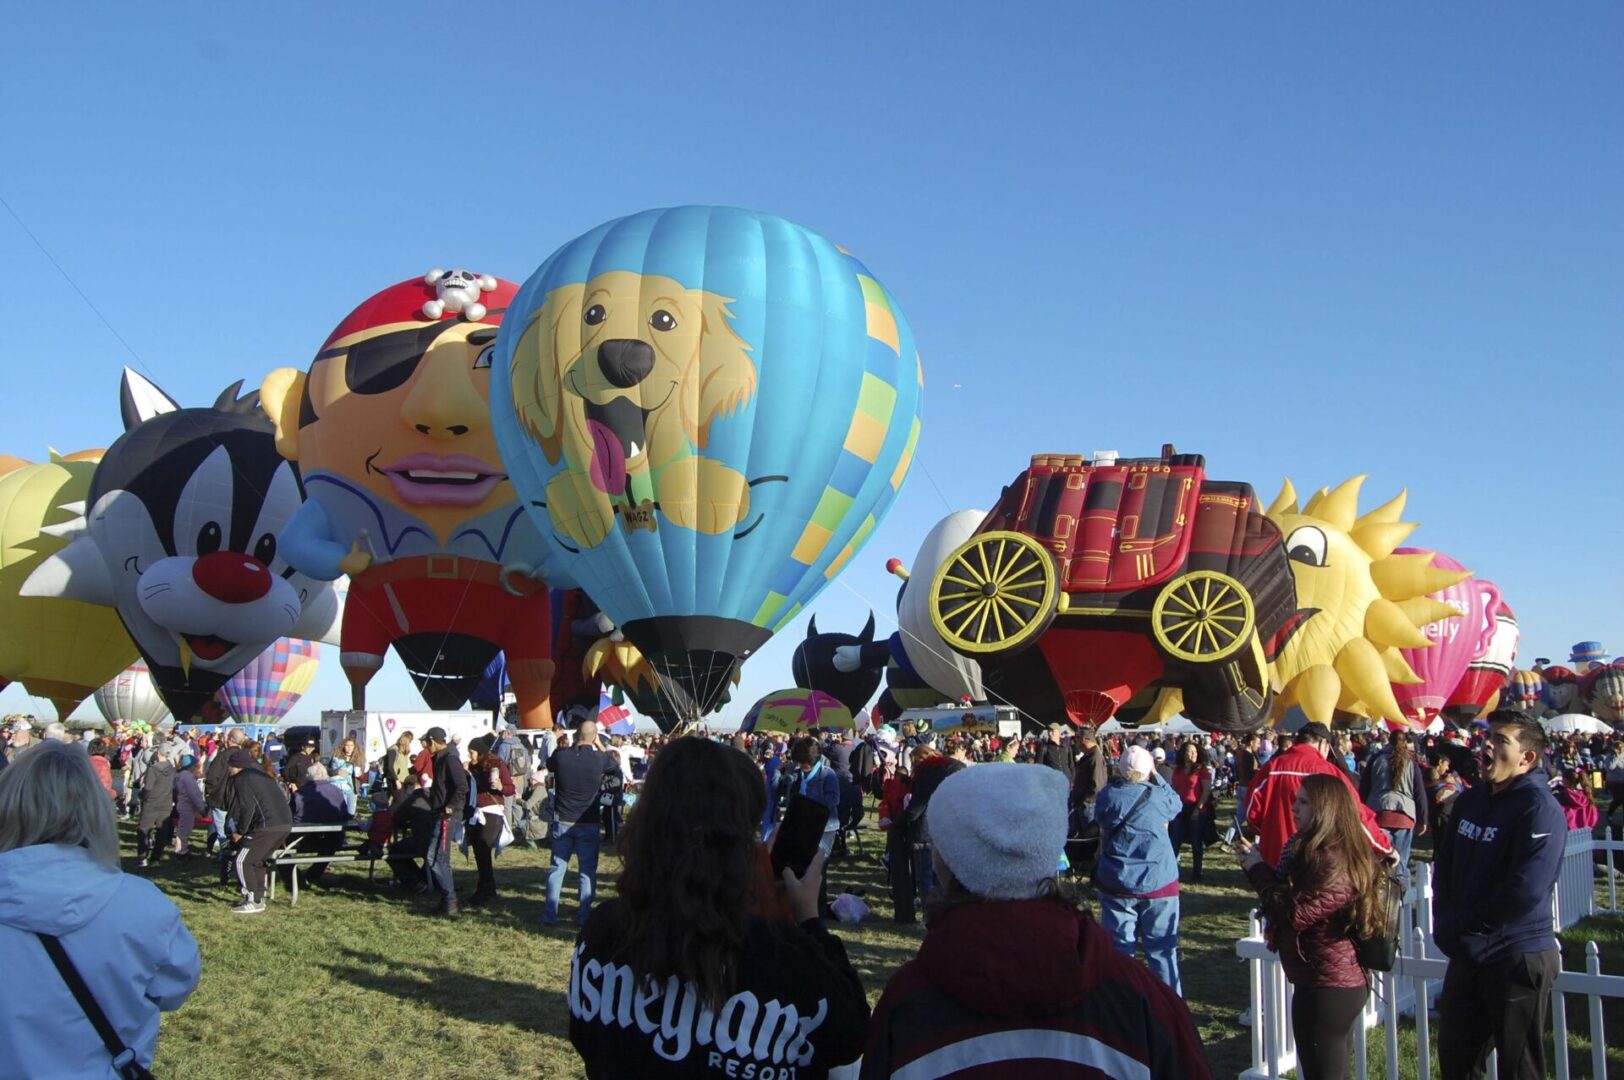 A crowd of people watching hot air balloons being inflated.